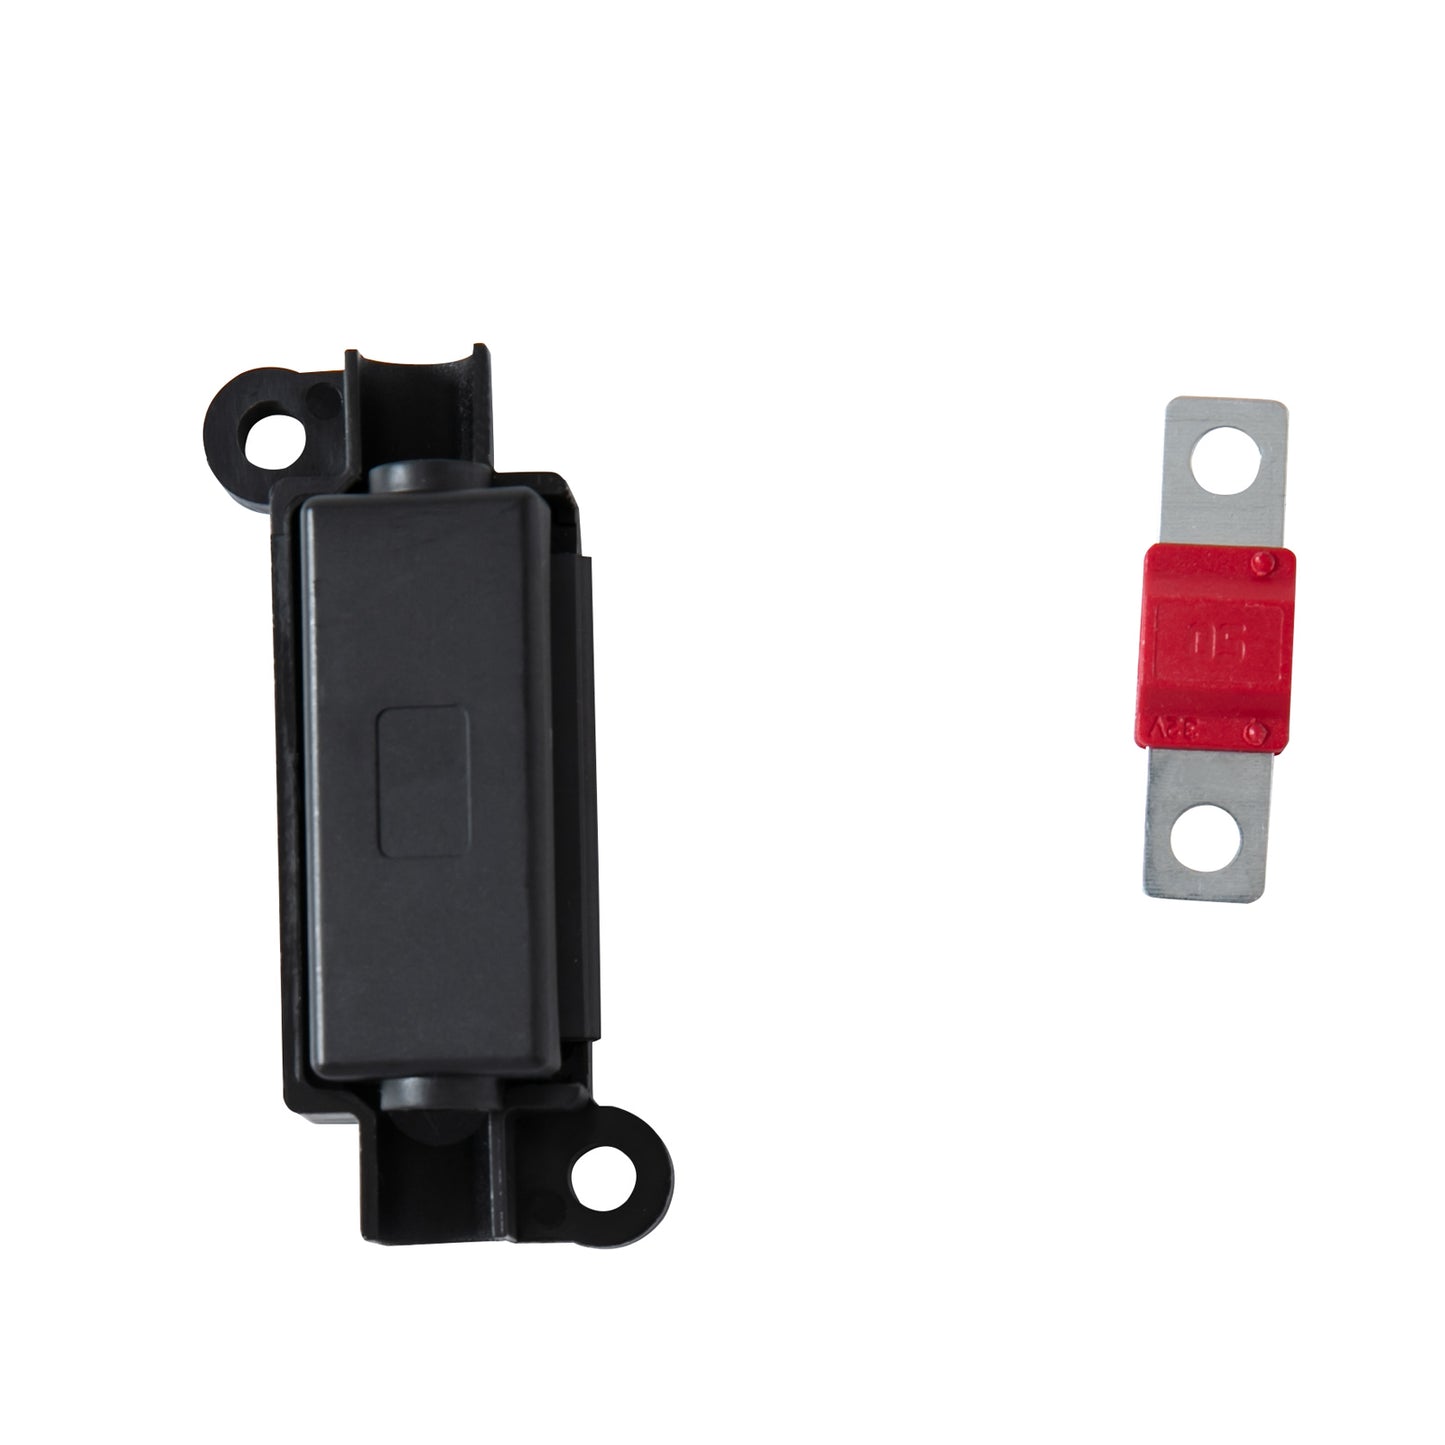 VoltX 1pc 50Amp Fuse Holder Case High Quality 12 Volt Protect Your Circuit